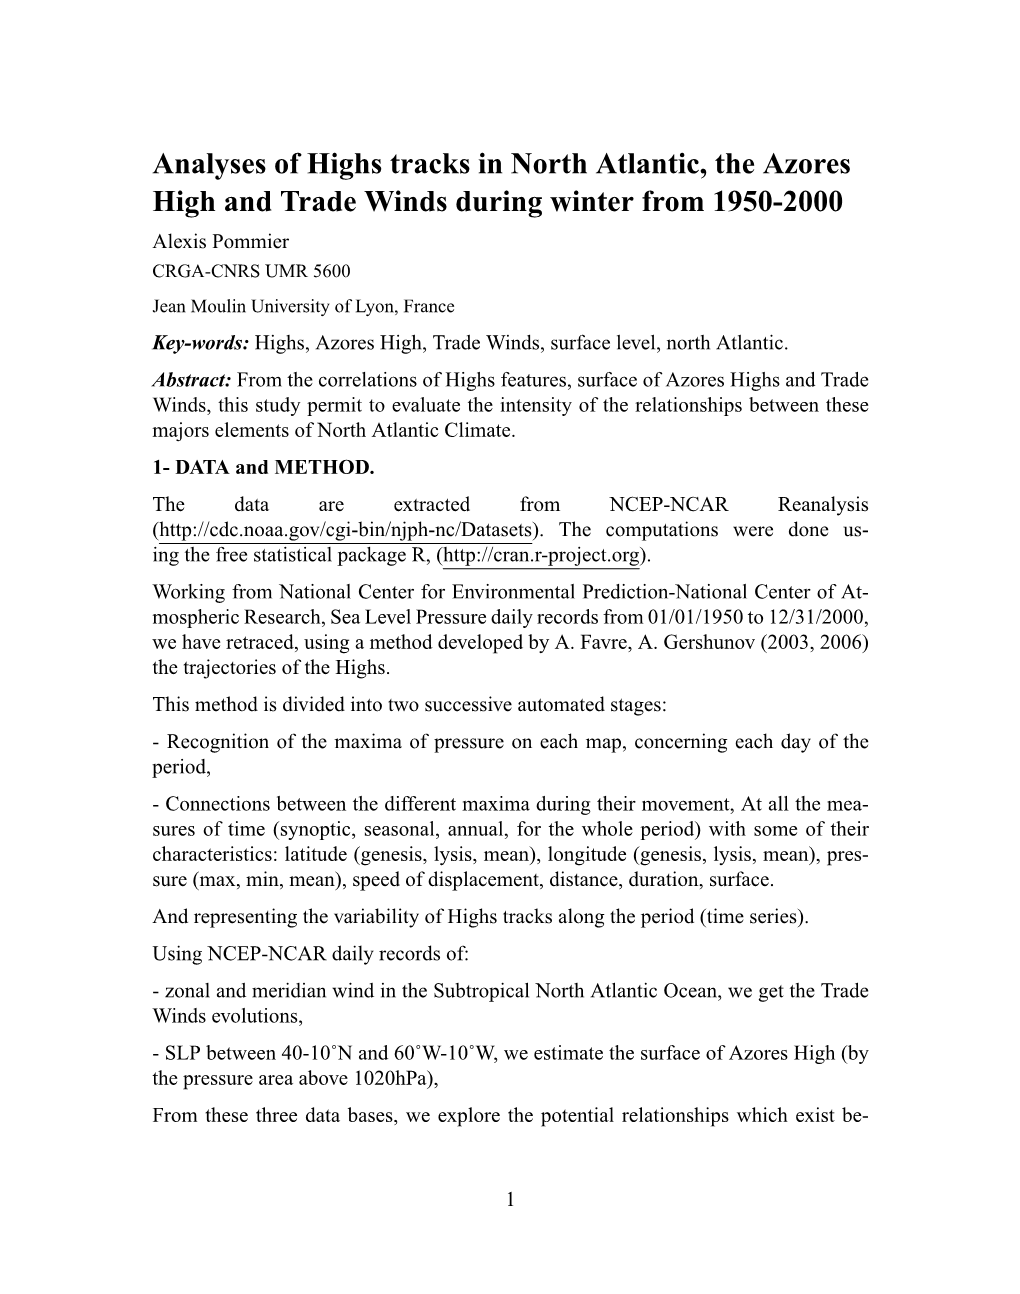 Analyses of Highs Tracks in North Atlantic, the Azores High and Trade